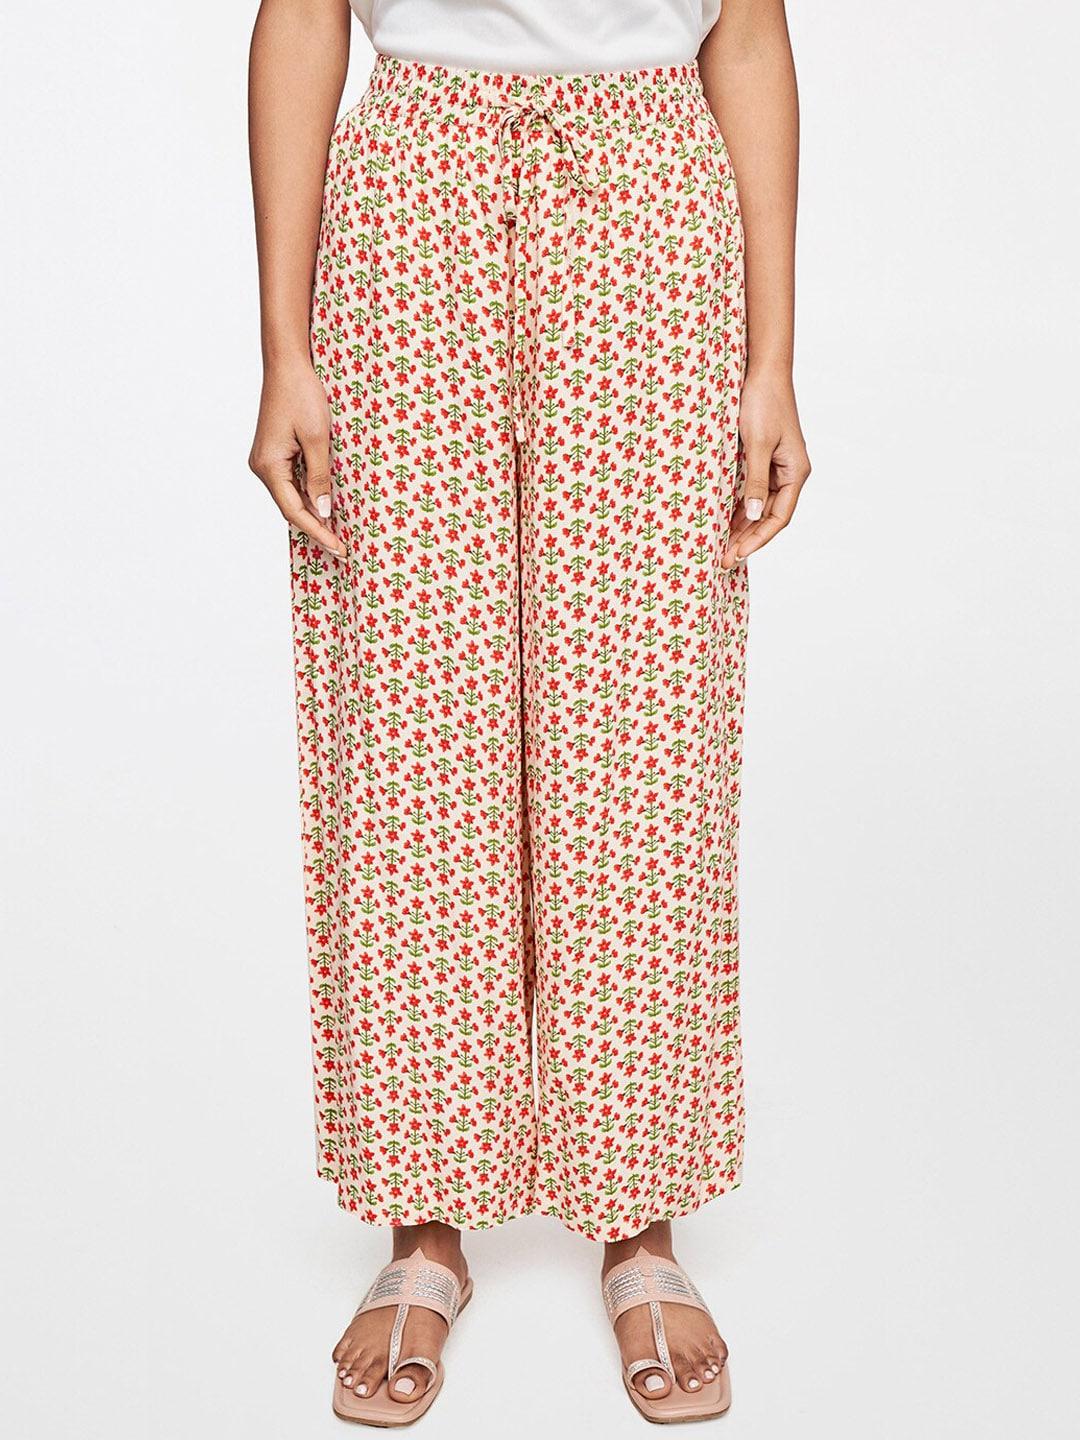 itse women off white & red floral printed trousers